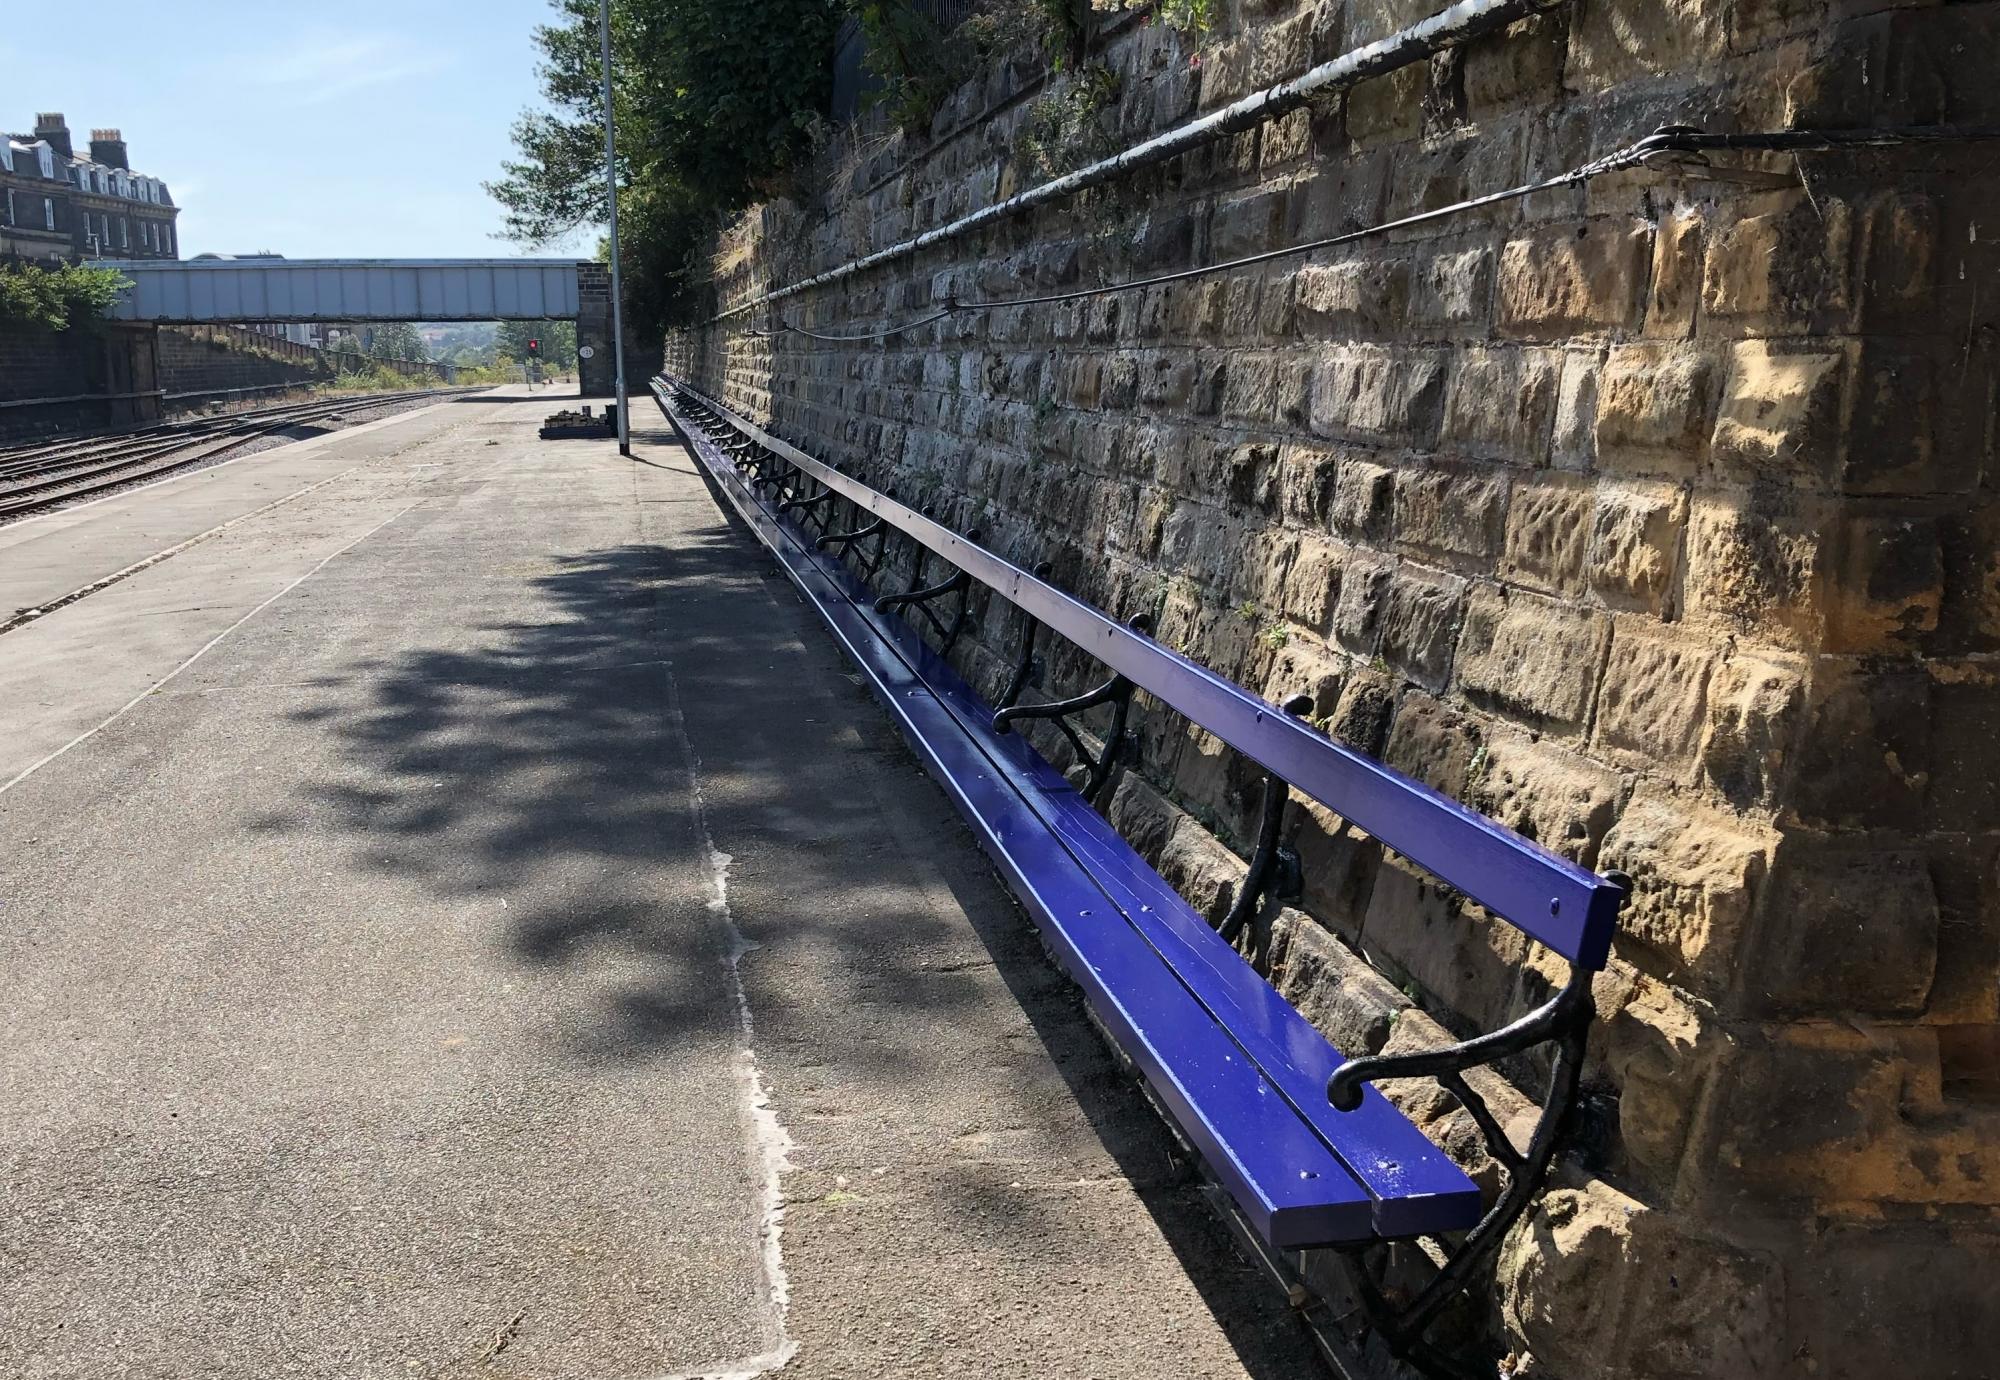 Network Rail complete restoration work to Grade II listed bench at Scarborough railway station